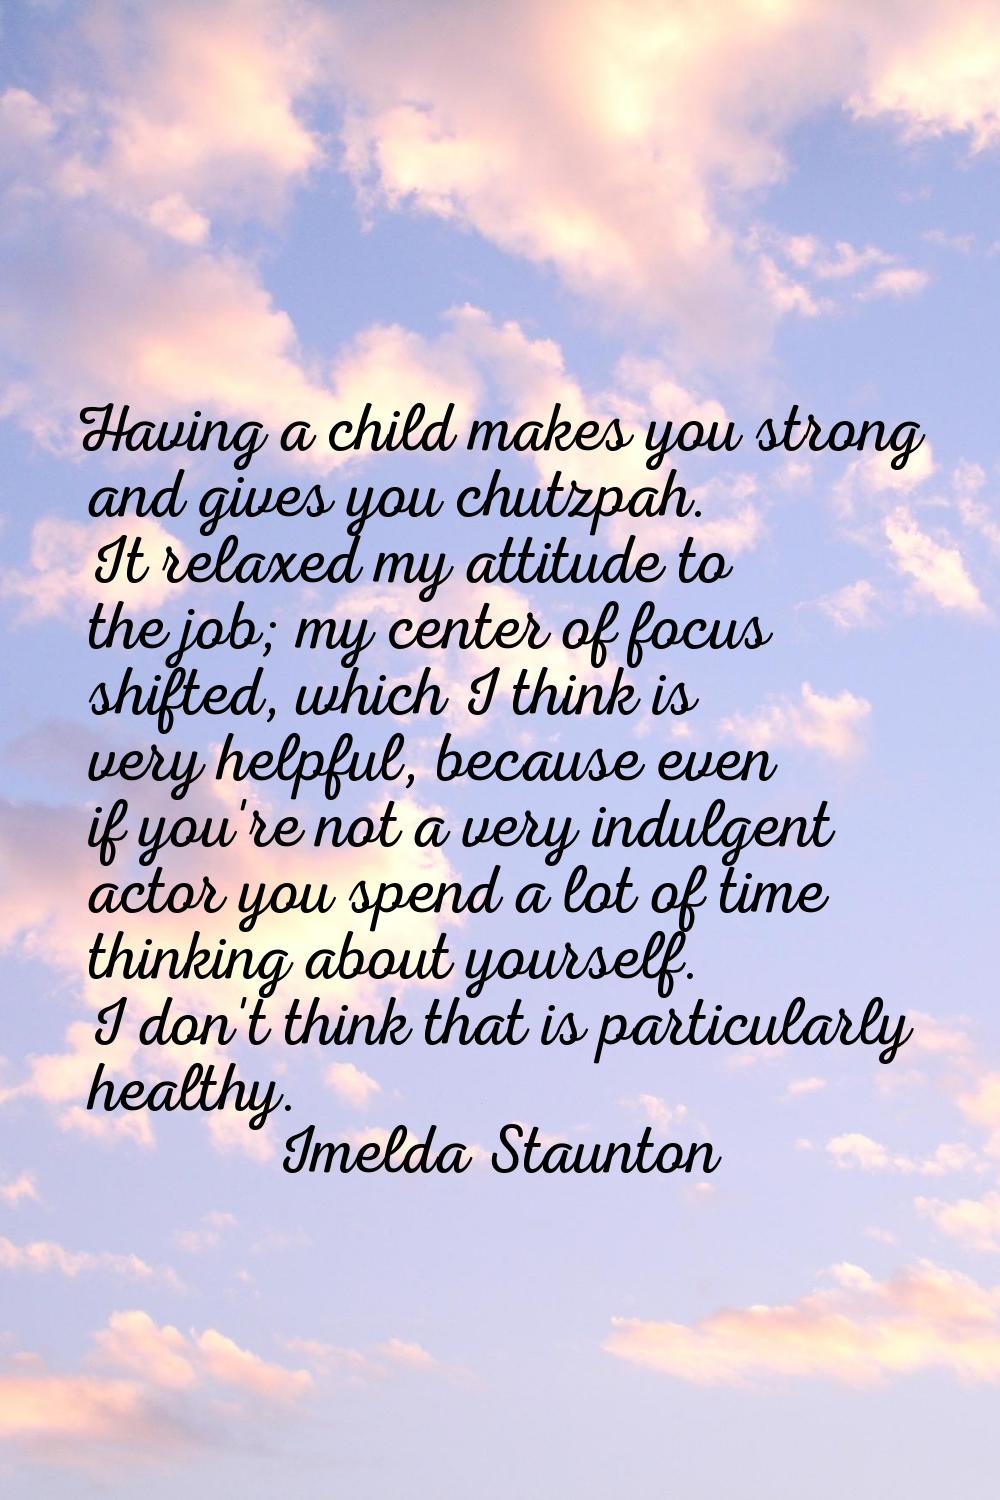 Having a child makes you strong and gives you chutzpah. It relaxed my attitude to the job; my cente